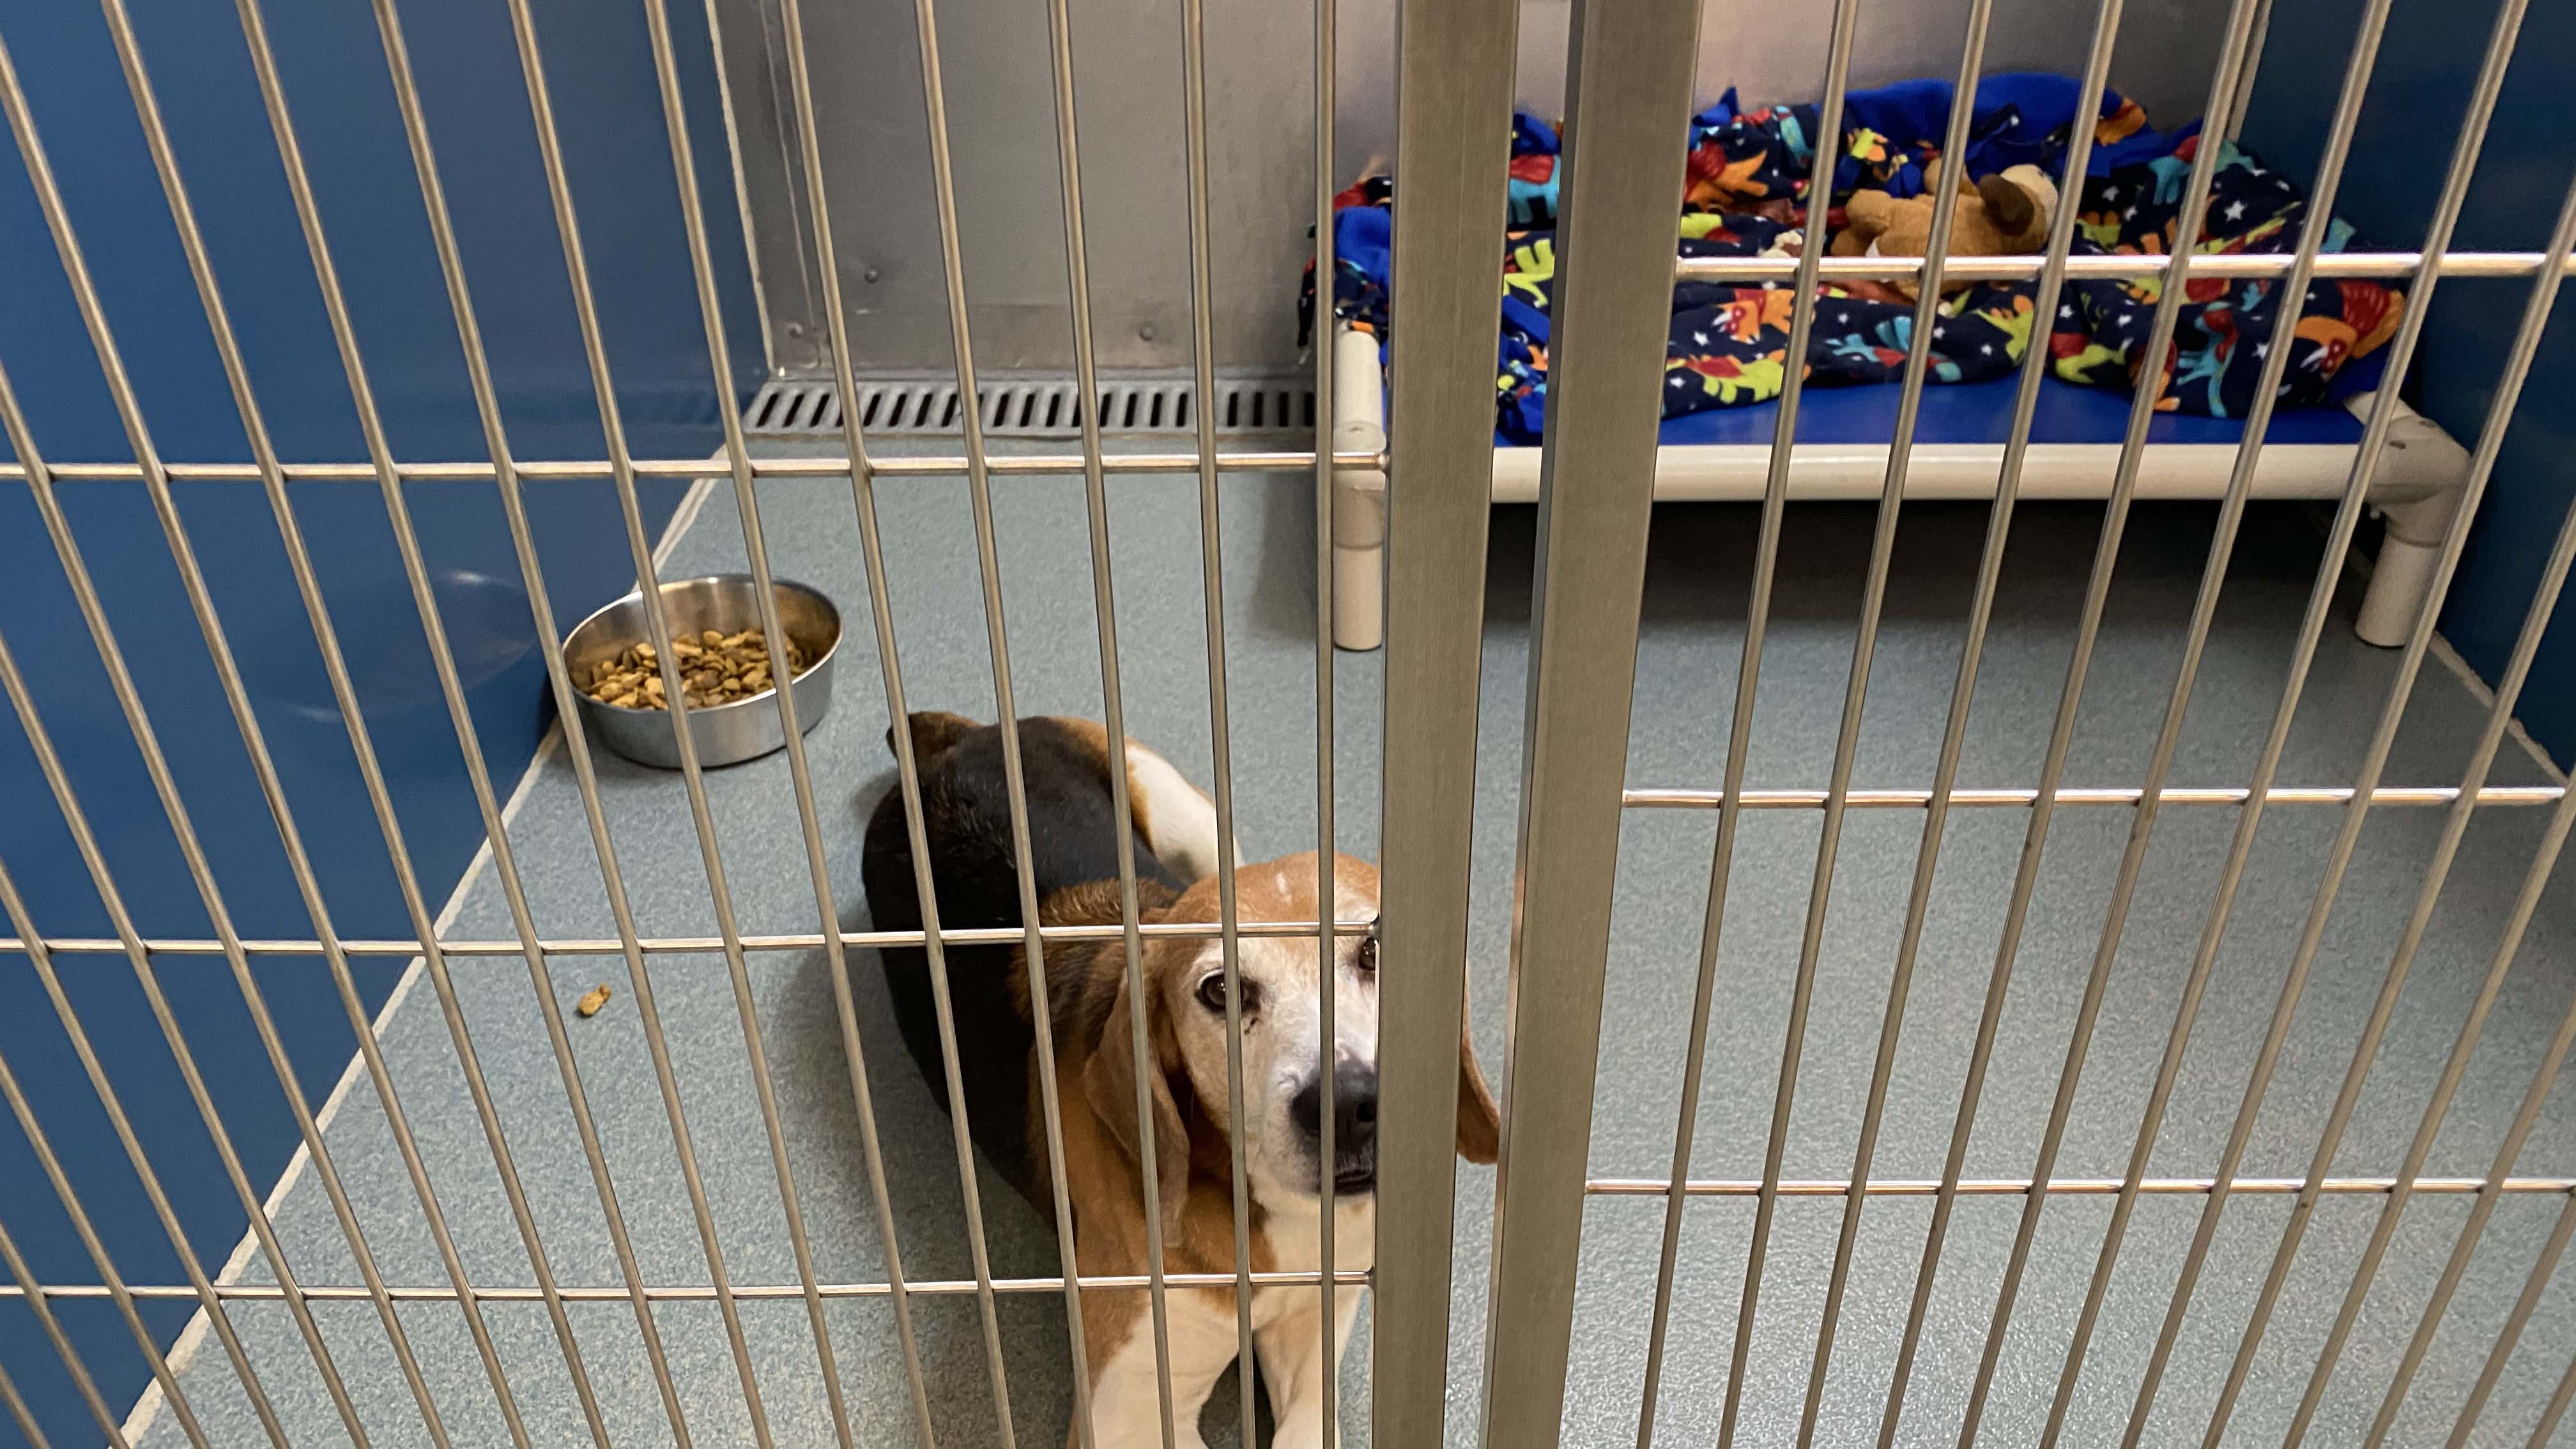 Photo by Katherine Hafner. One of four beagles that arrived at the Chesapeake Humane Society after being rescued from a breeding facility in Virginia.